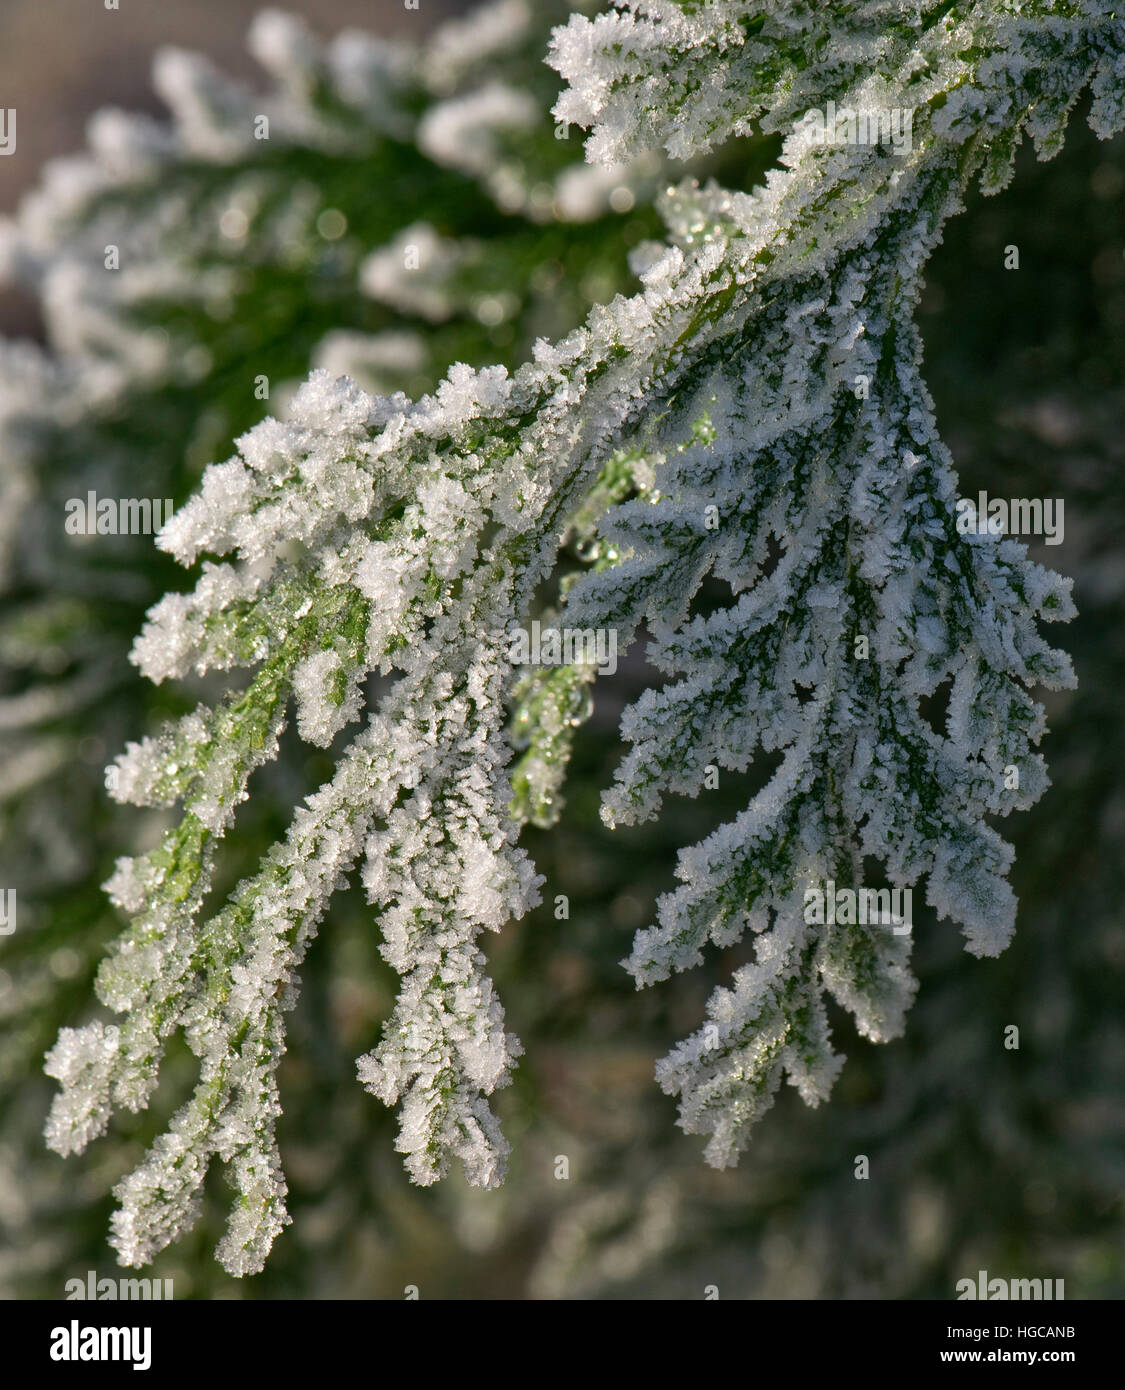 Hoar frost on the foliage of a Lawson's cypress on a cold winter morning in December Stock Photo